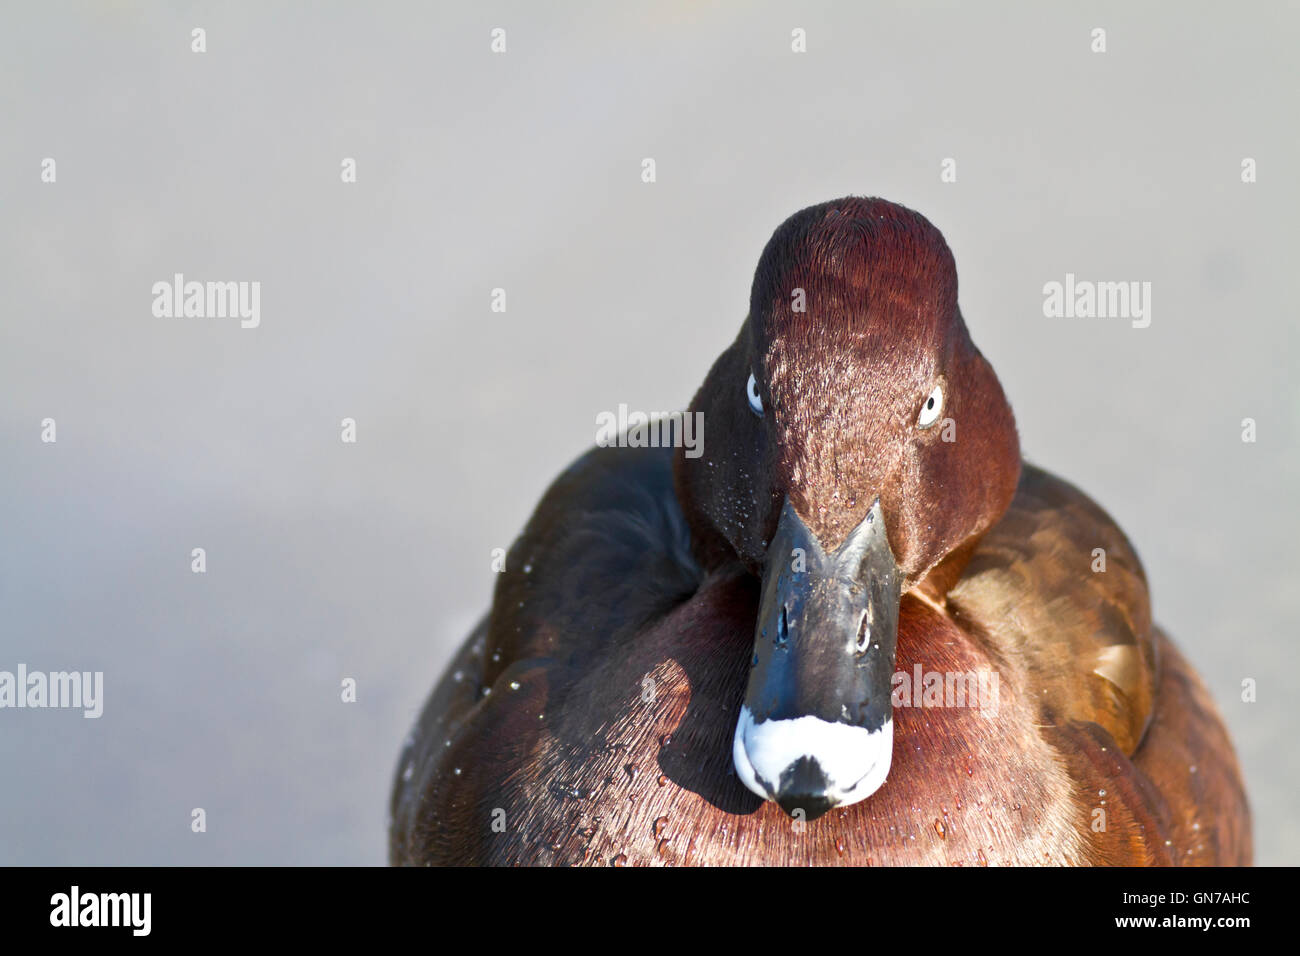 Annoyed looking duck on an icy pond staring intently at the camera Stock Photo